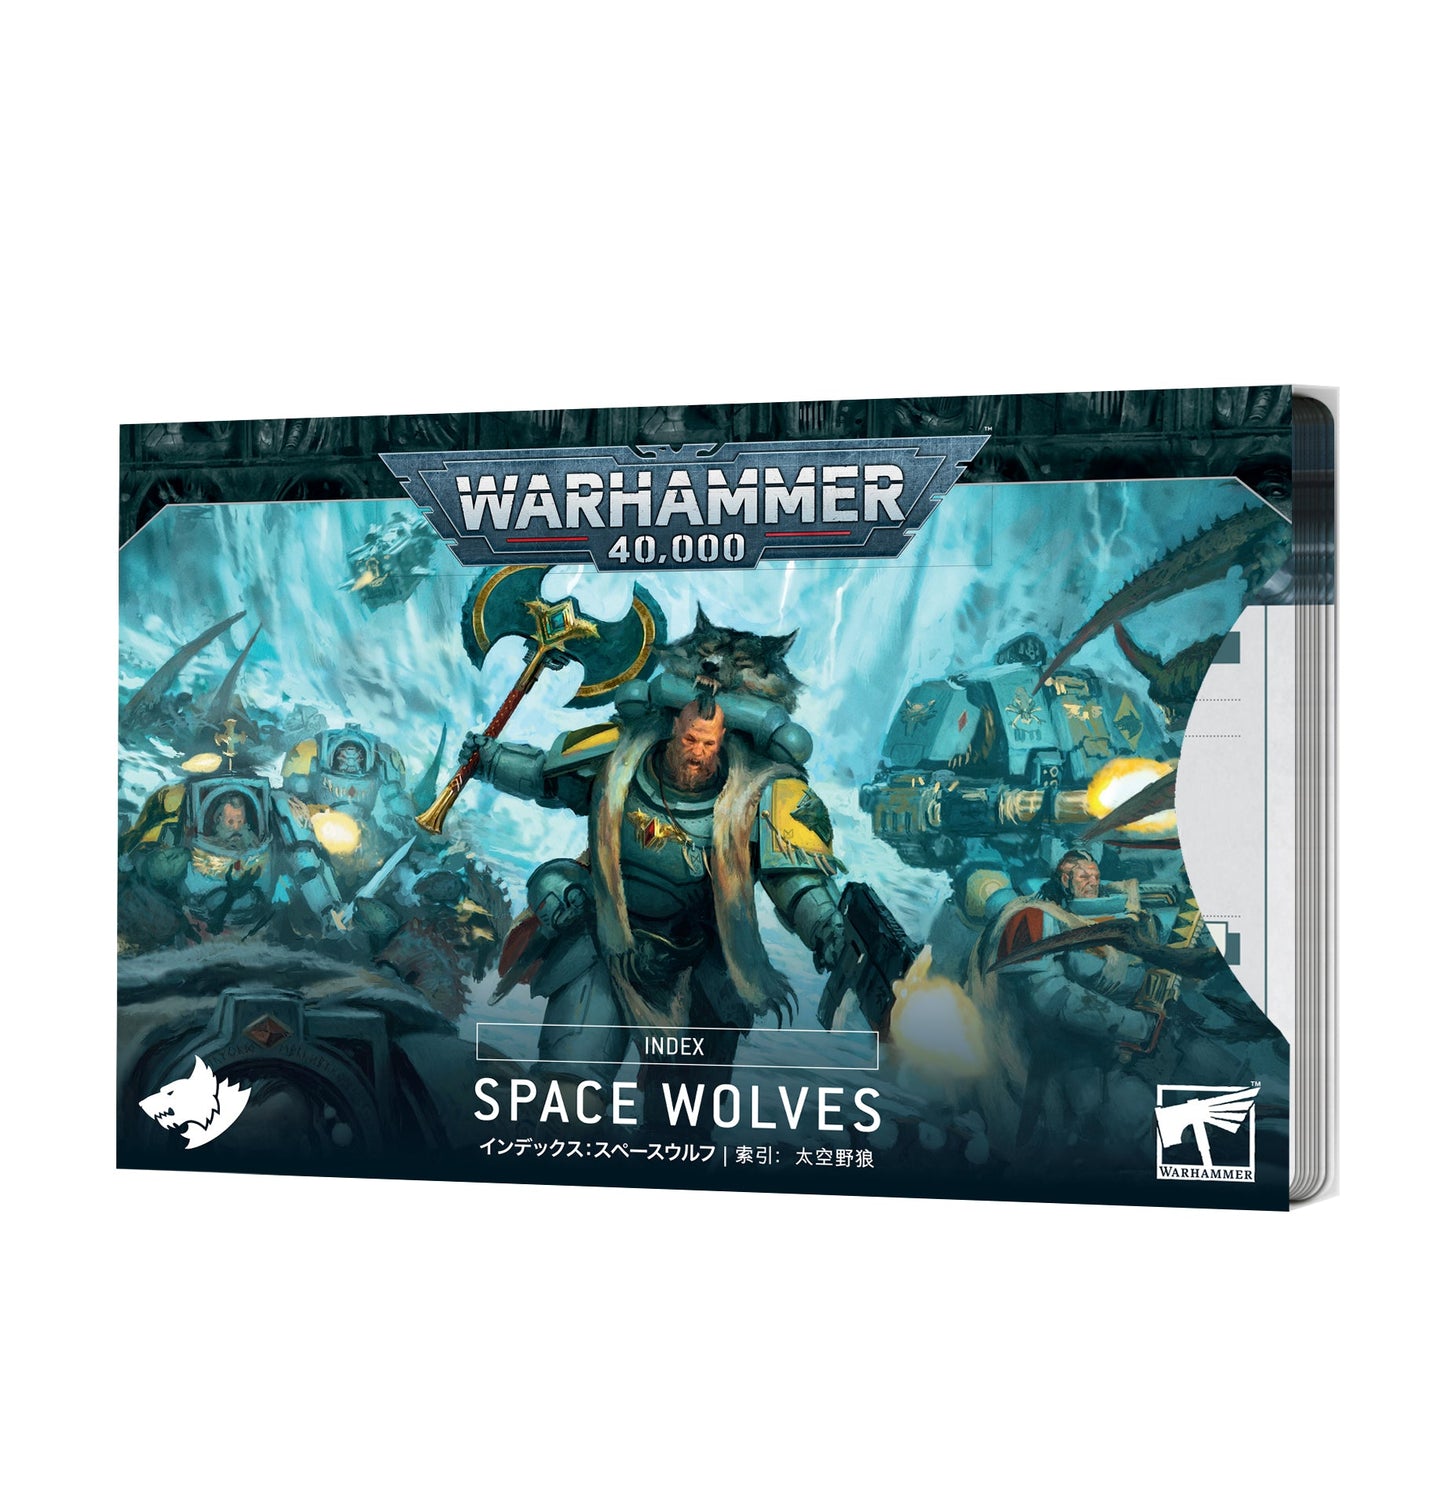 Index Cards: Space Wolves (Chinese) - 索引卡: 太空野狼(簡中版)